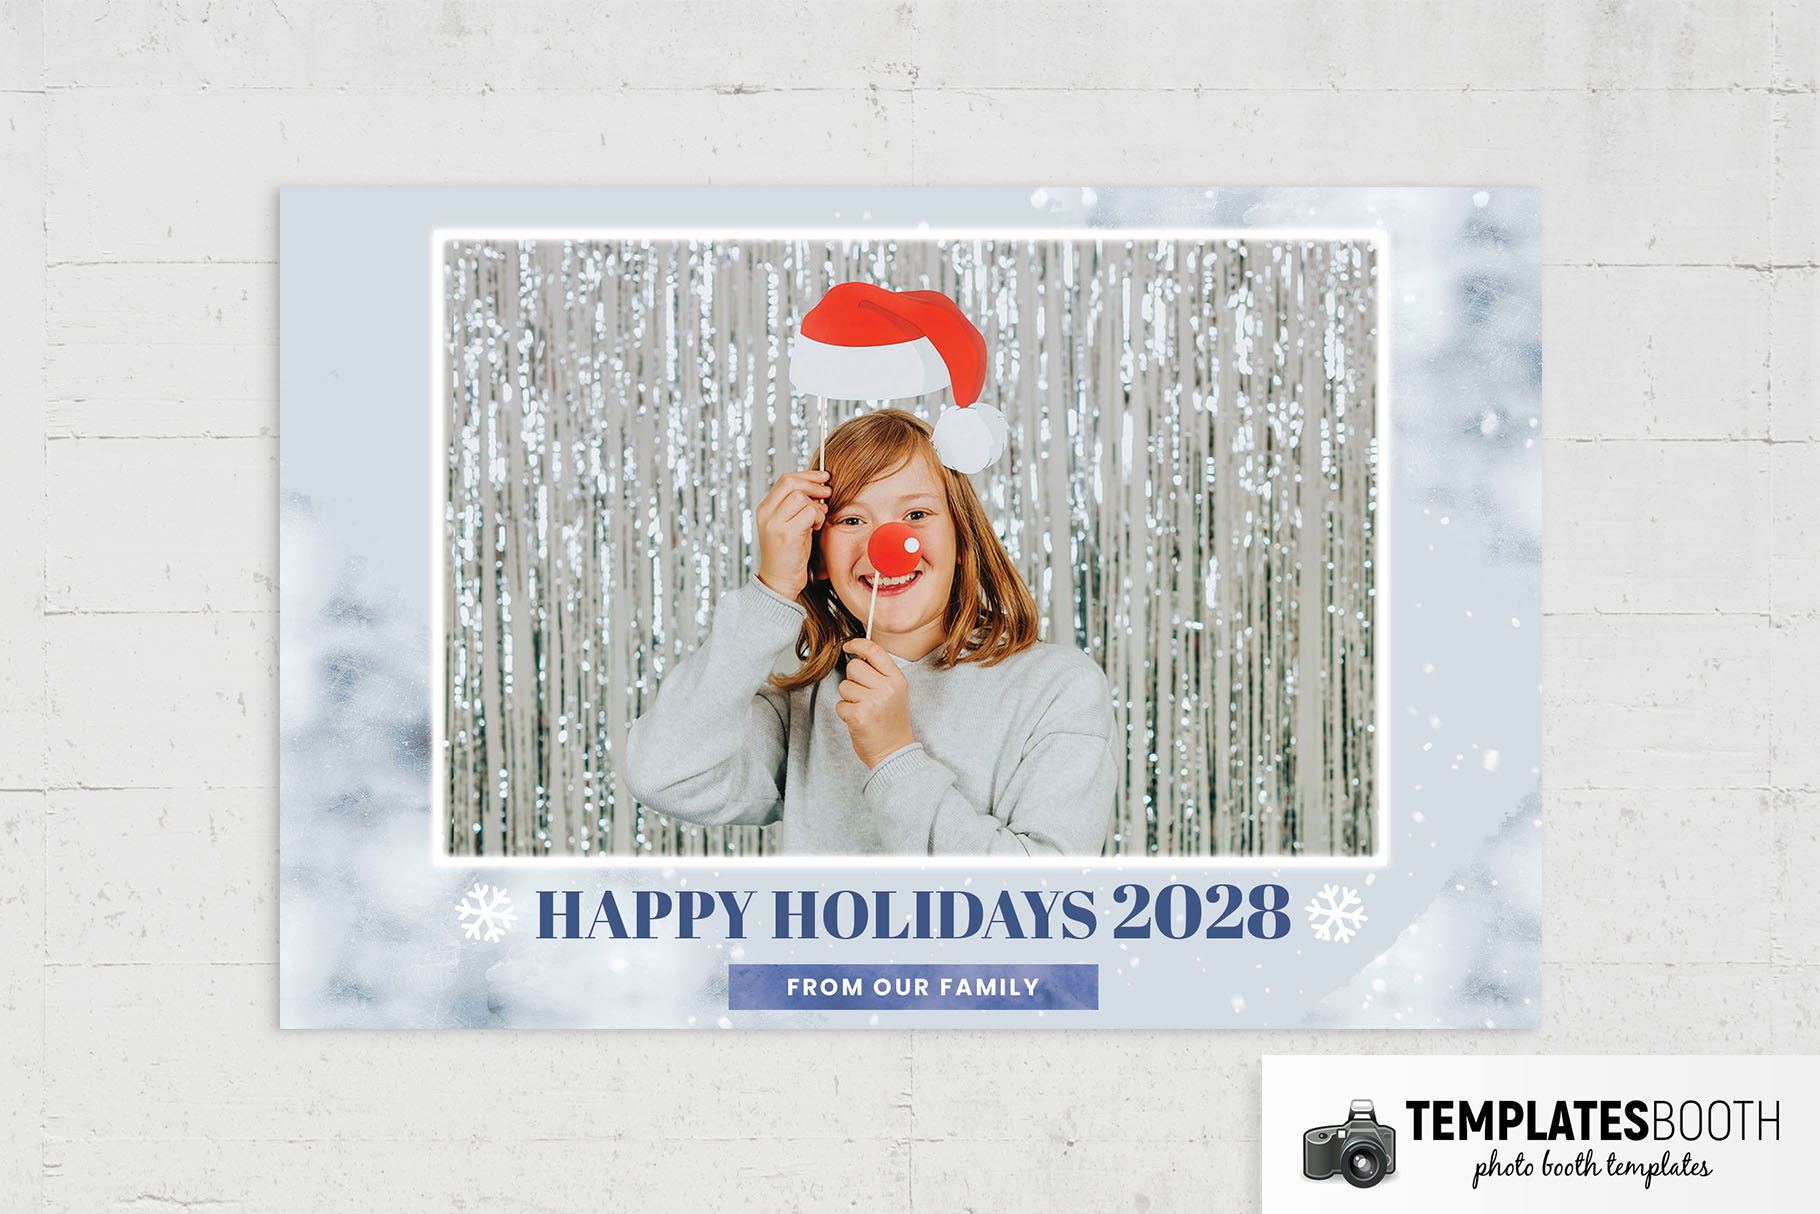 Free Frosty Winter Photo Booth Template